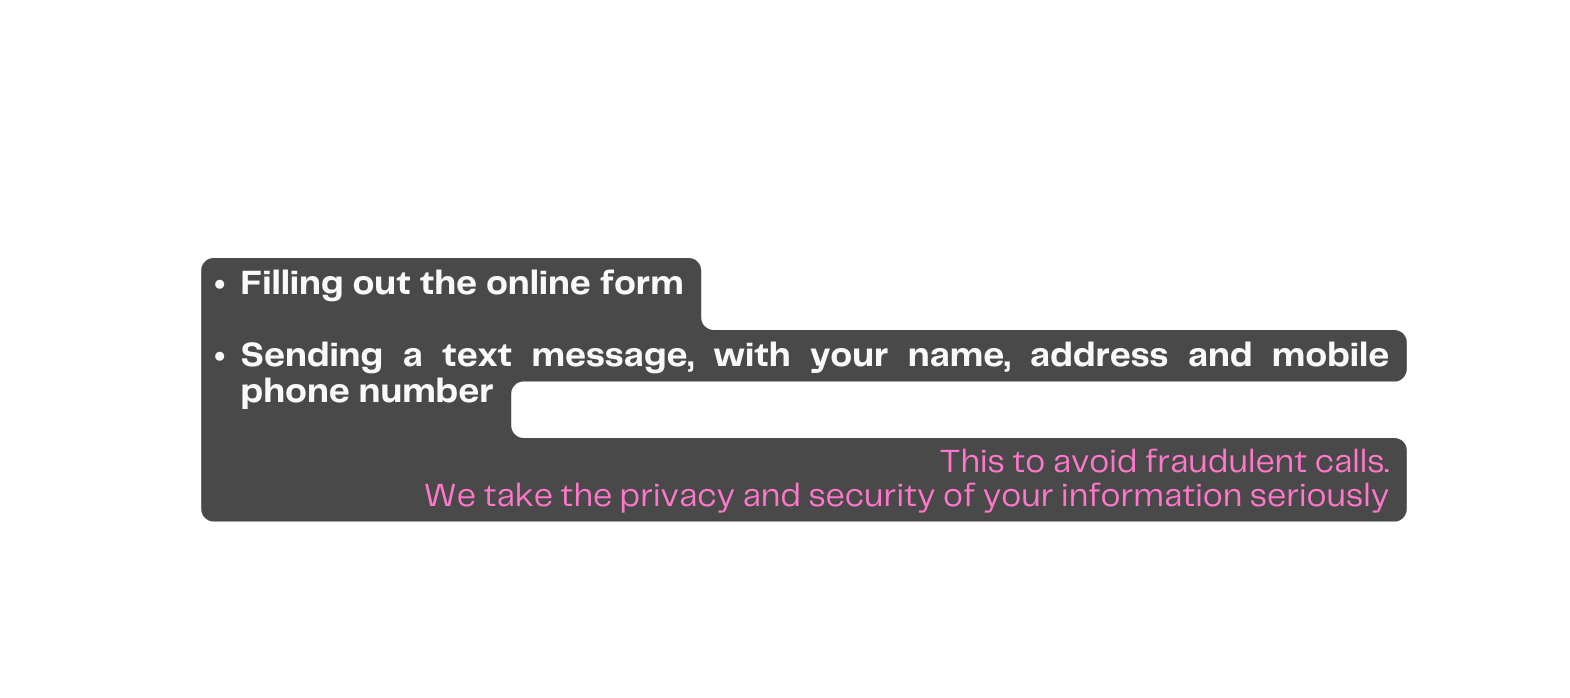 Filling out the online form Sending a text message with your name address and mobile phone number This to avoid fraudulent calls We take the privacy and security of your information seriously